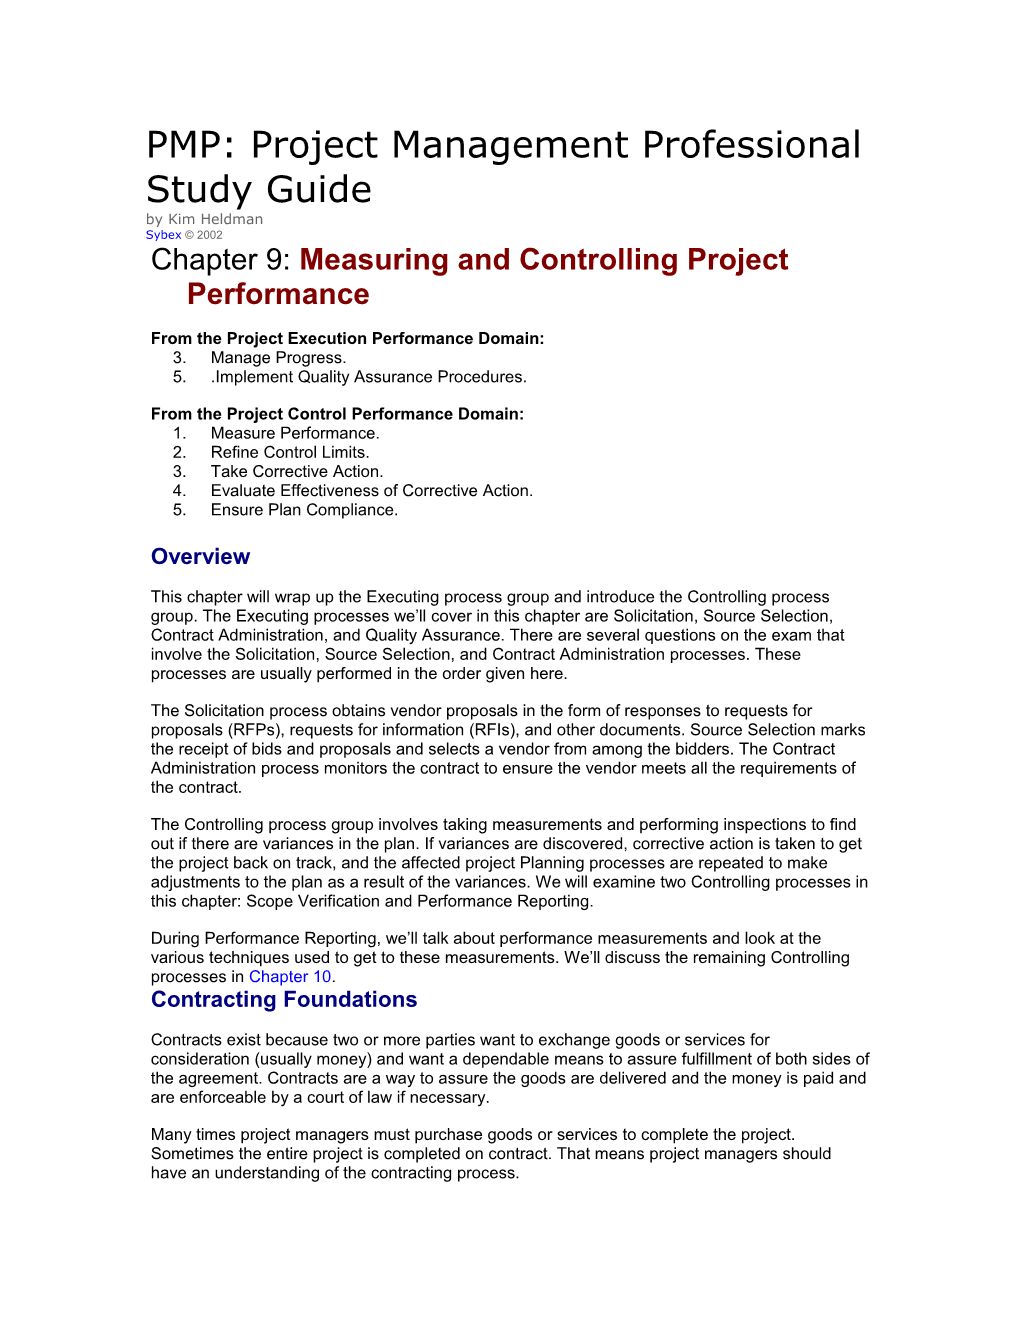 PMP Project Management Professional Study Guide 2